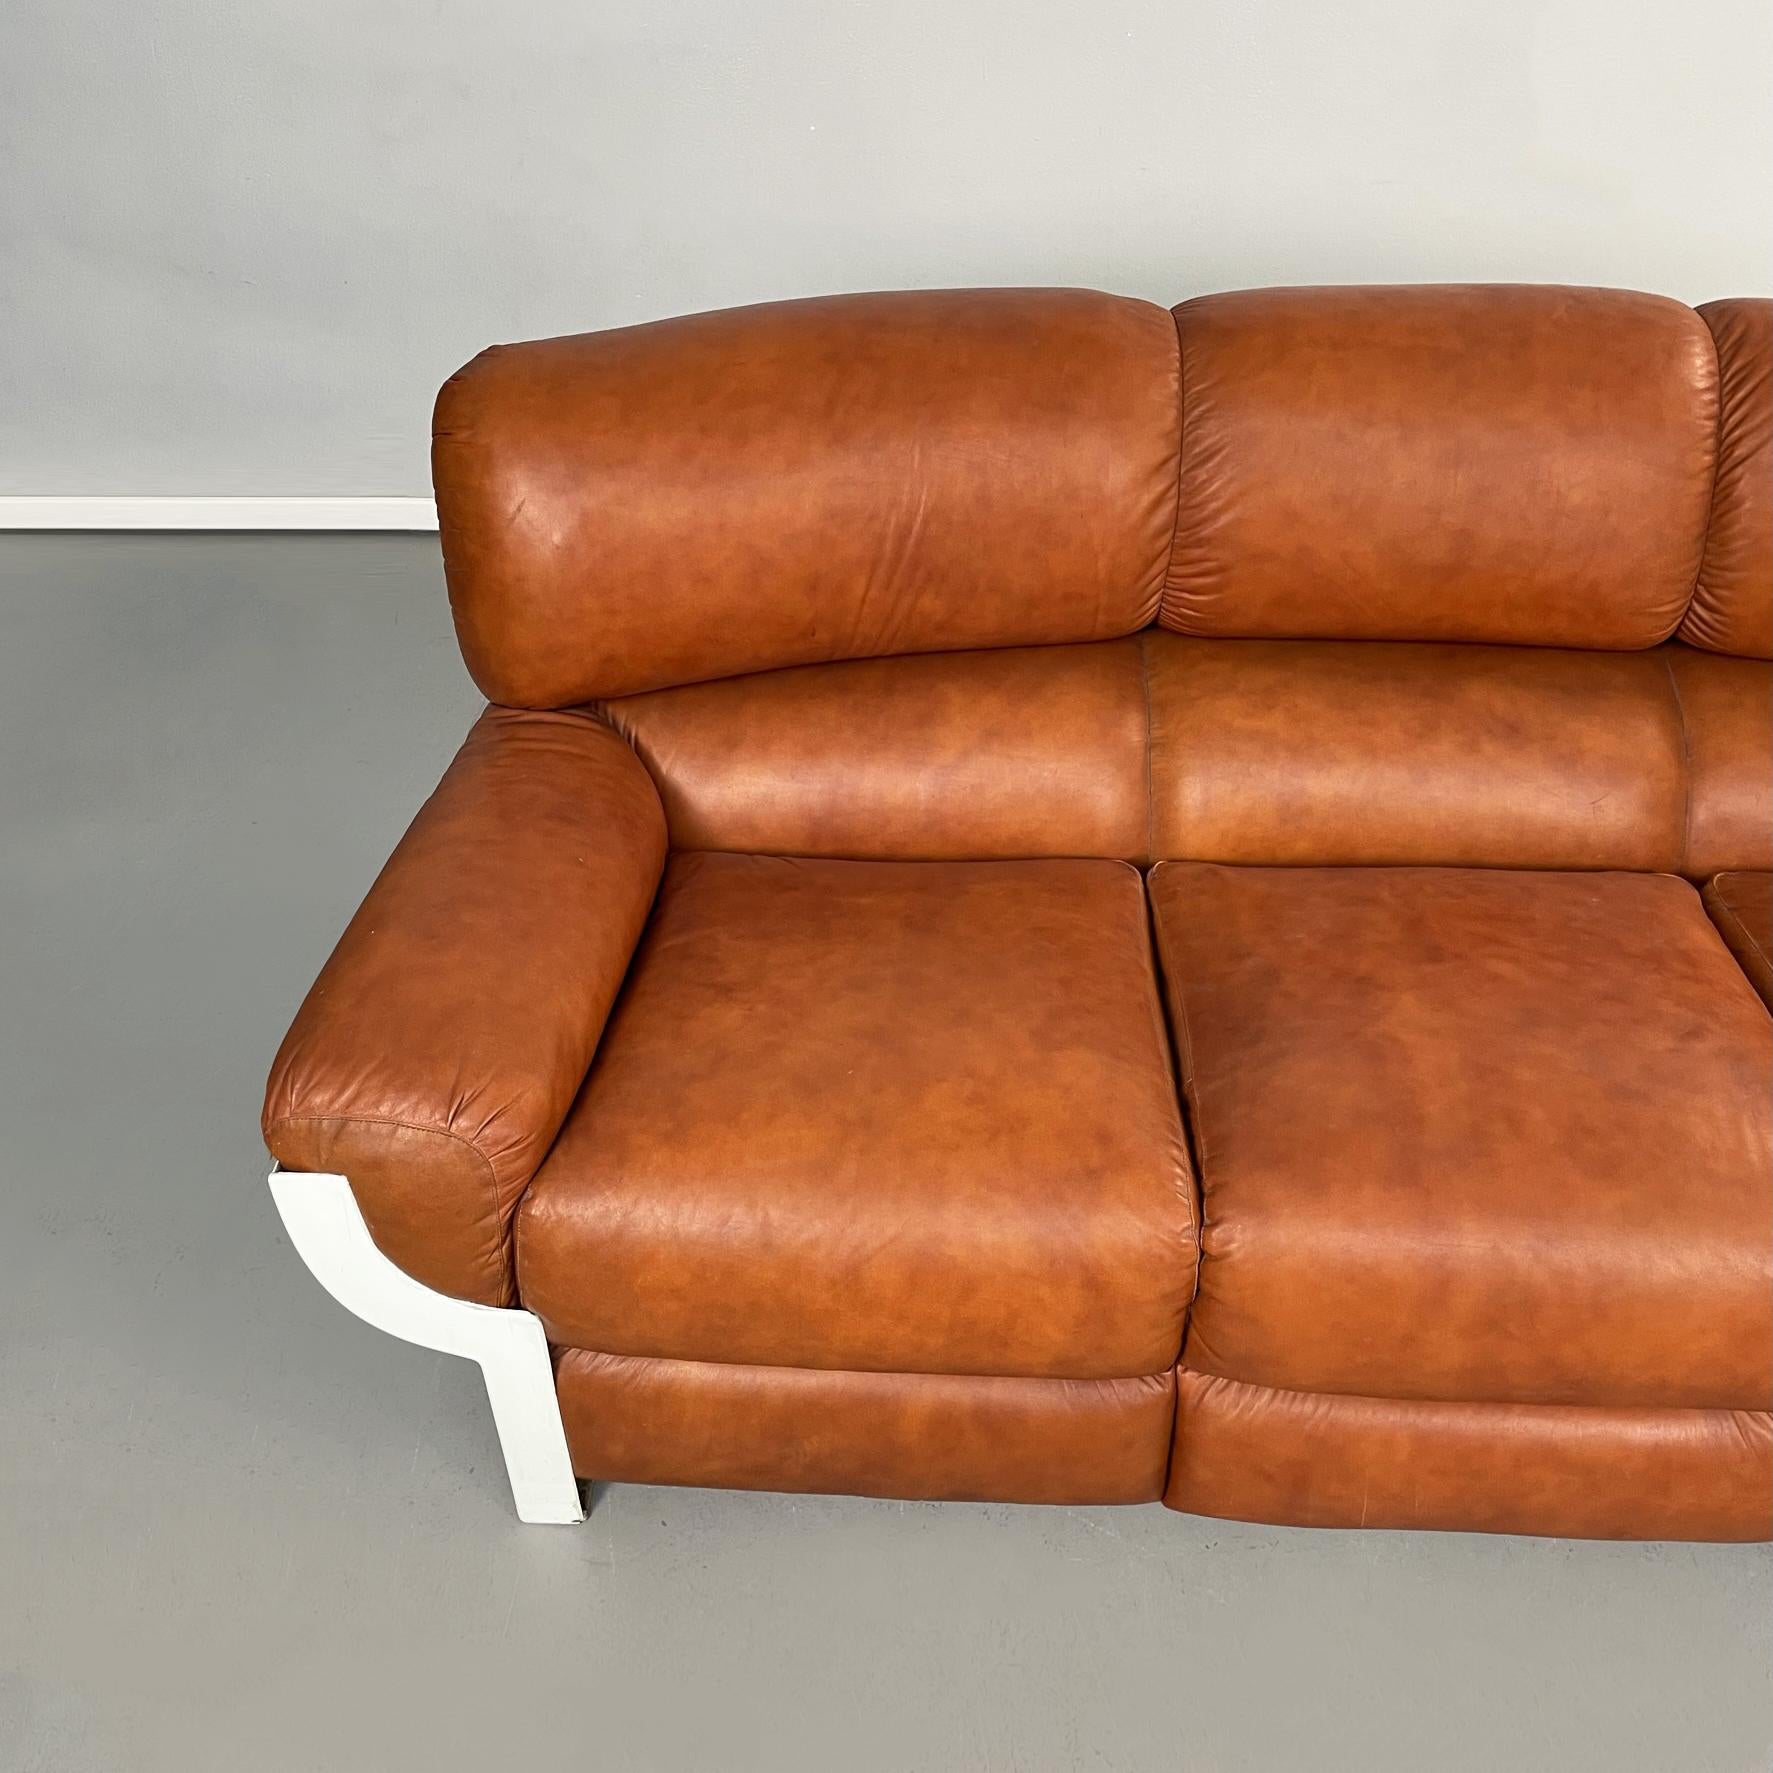 Late 20th Century Italian Mid-Century Brown Leather Plastic Sofa Flou by Betti Habitat Ids, 1970s For Sale